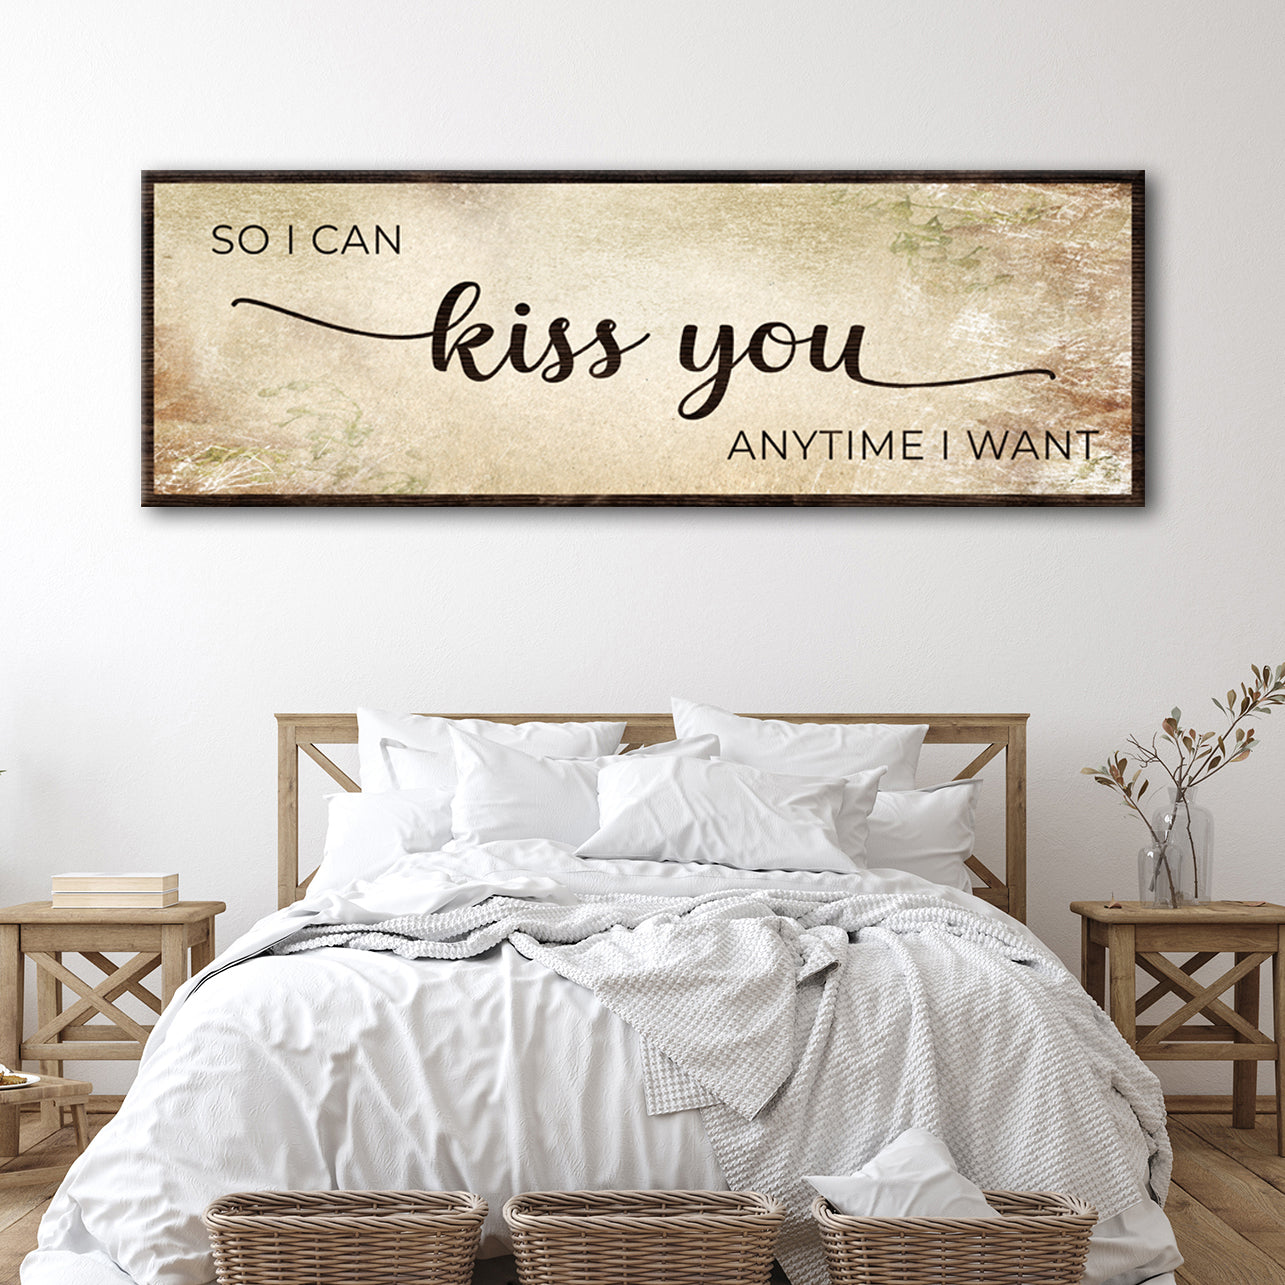 So I Can Kiss You Anytime I Want Grunge Sign Style 2 - Image by Tailored Canvases